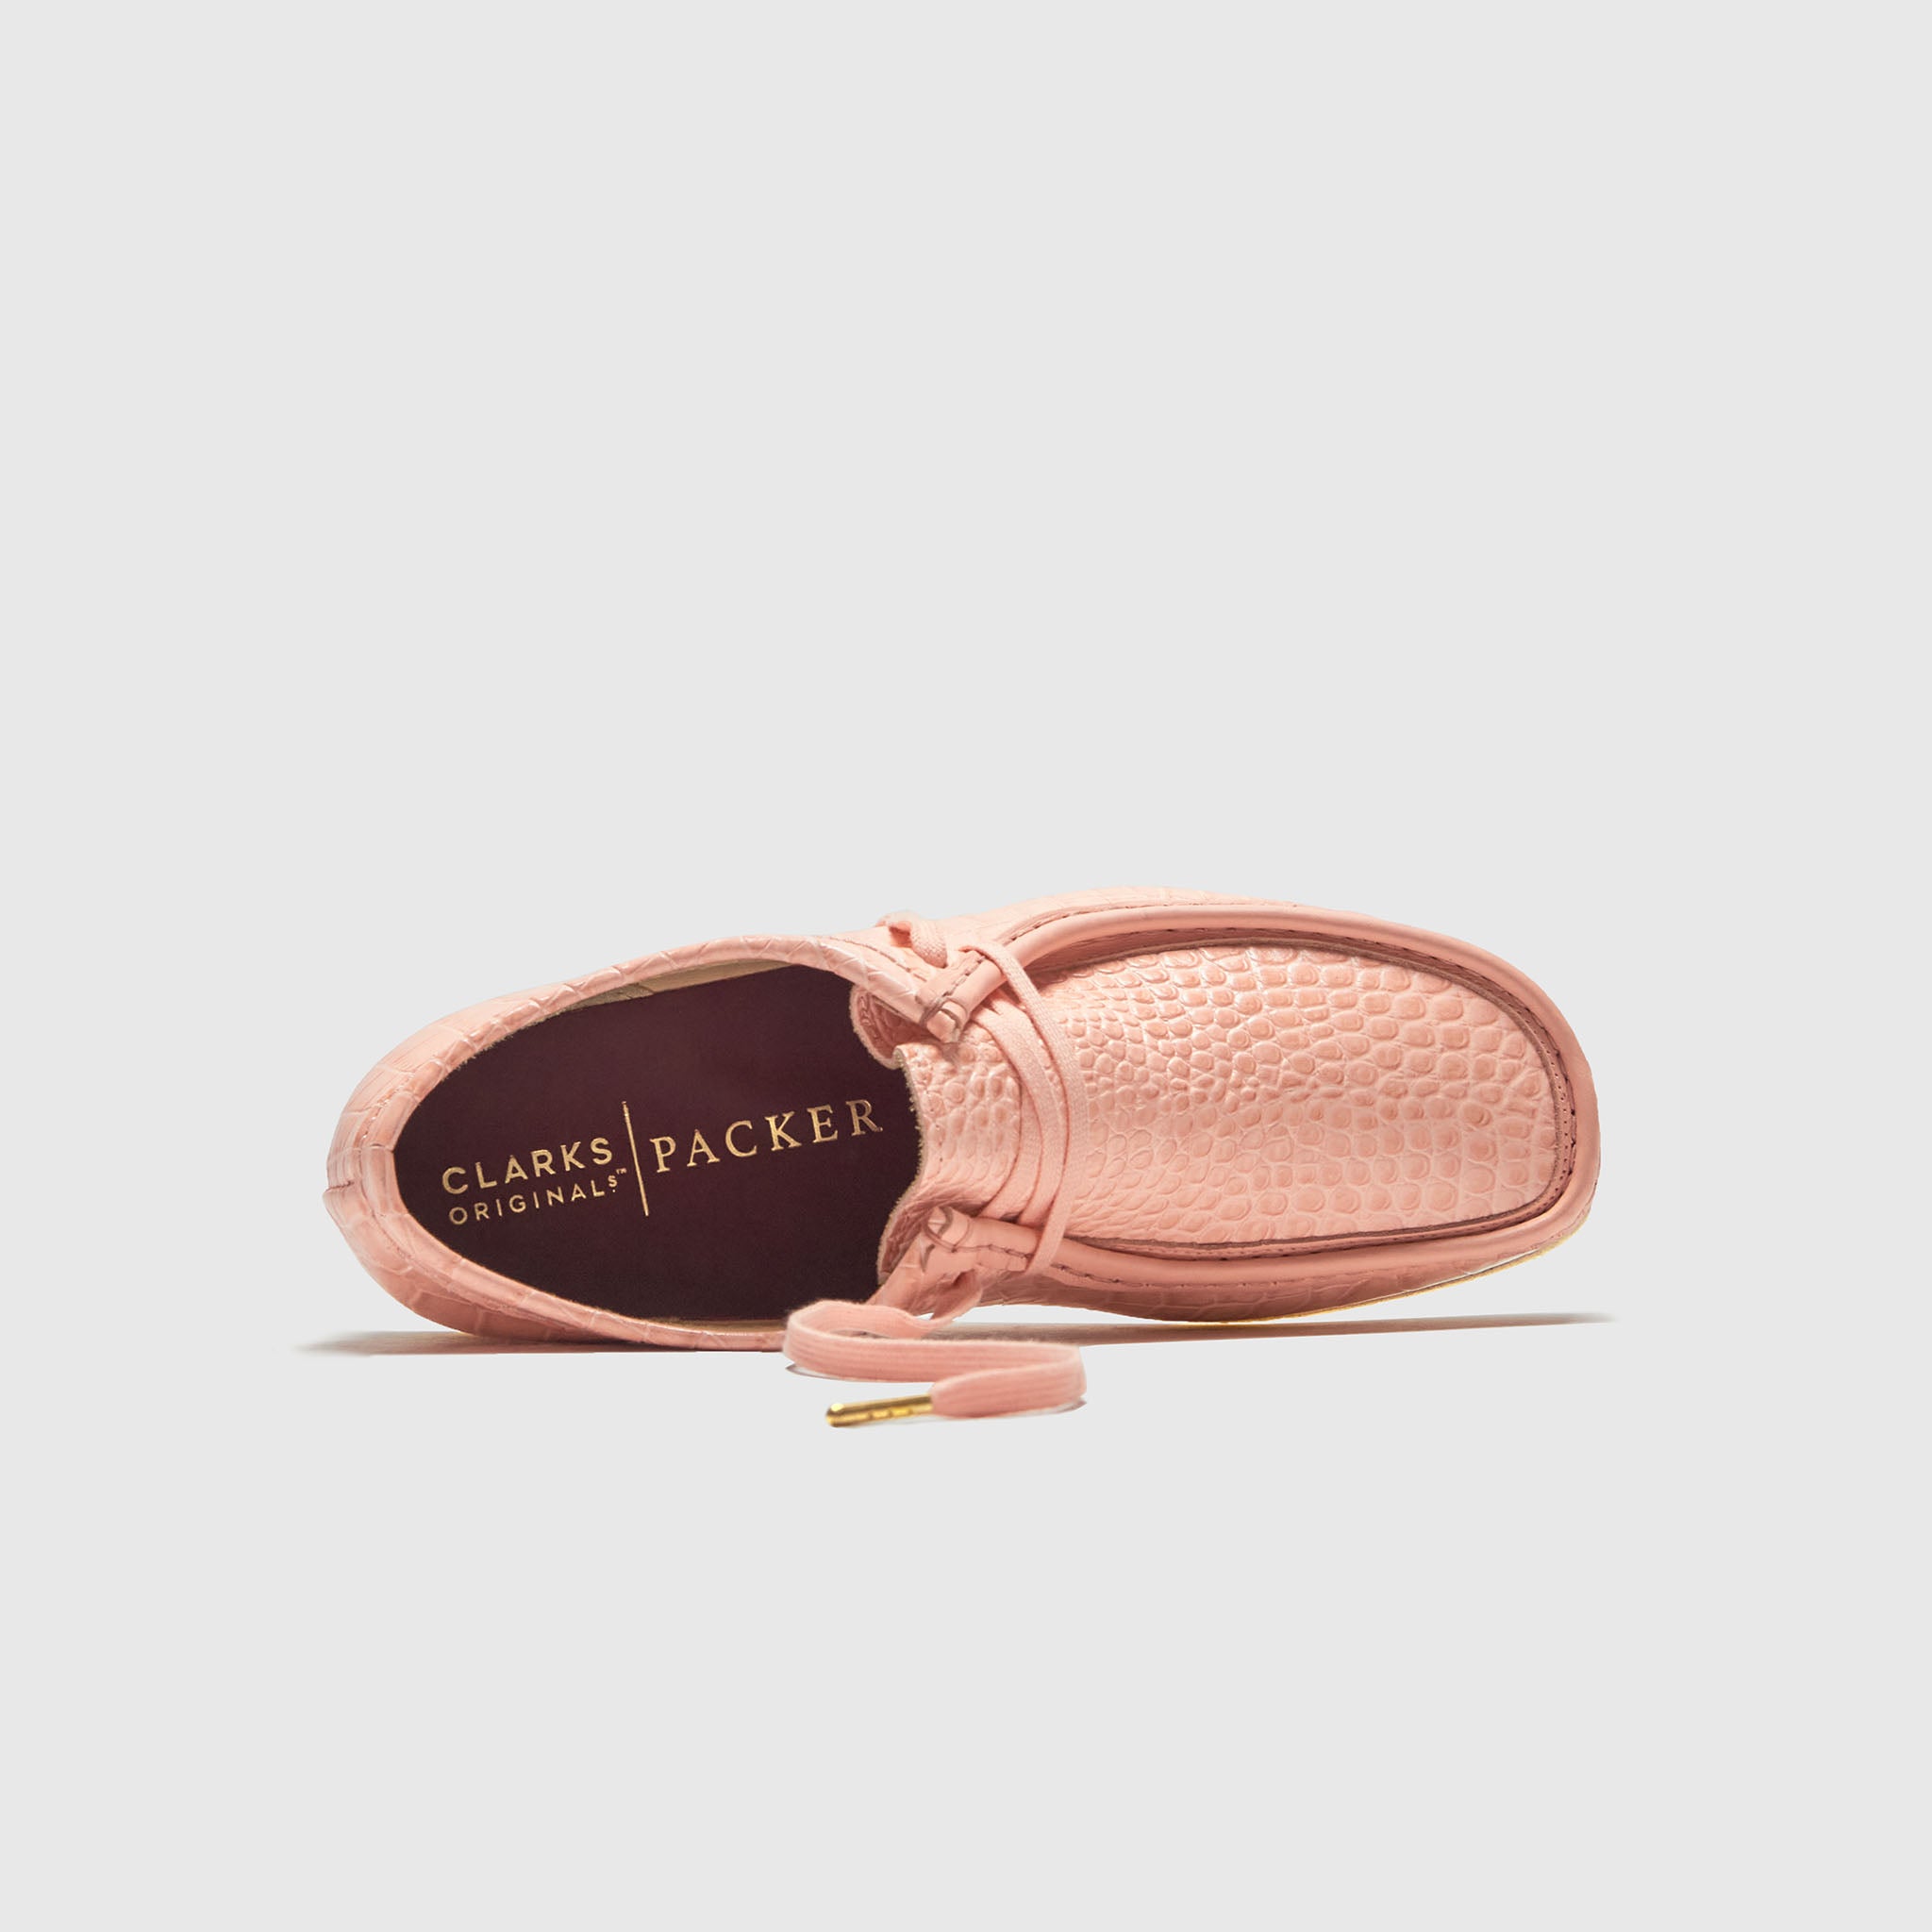 CLARKS WALLABEE "PINK CROC" – PACKER SHOES